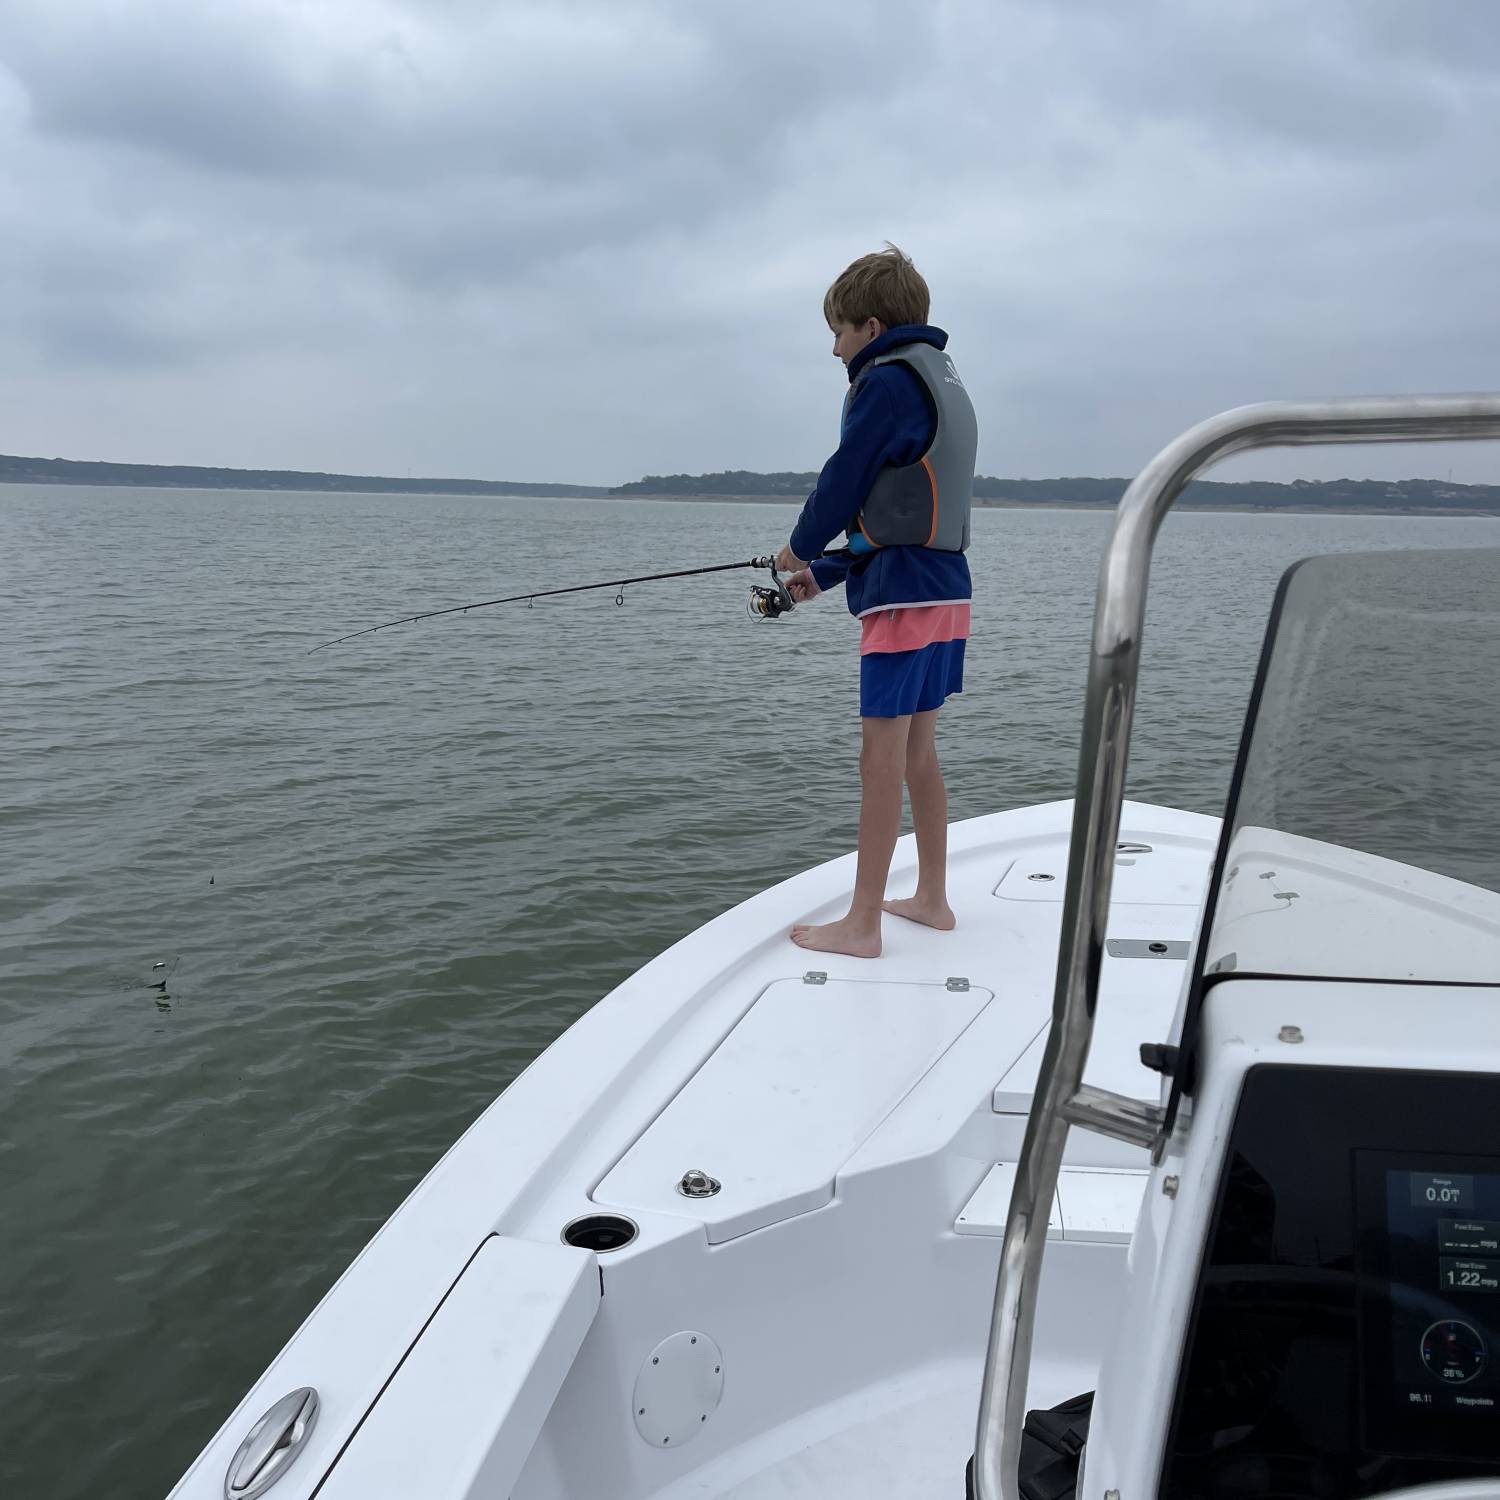 Title: Day on the lake - On board their Sportsman Tournament 214 Bay Boat - Location: Lake Belton. Participating in the Photo Contest #SportsmanFebruary2022